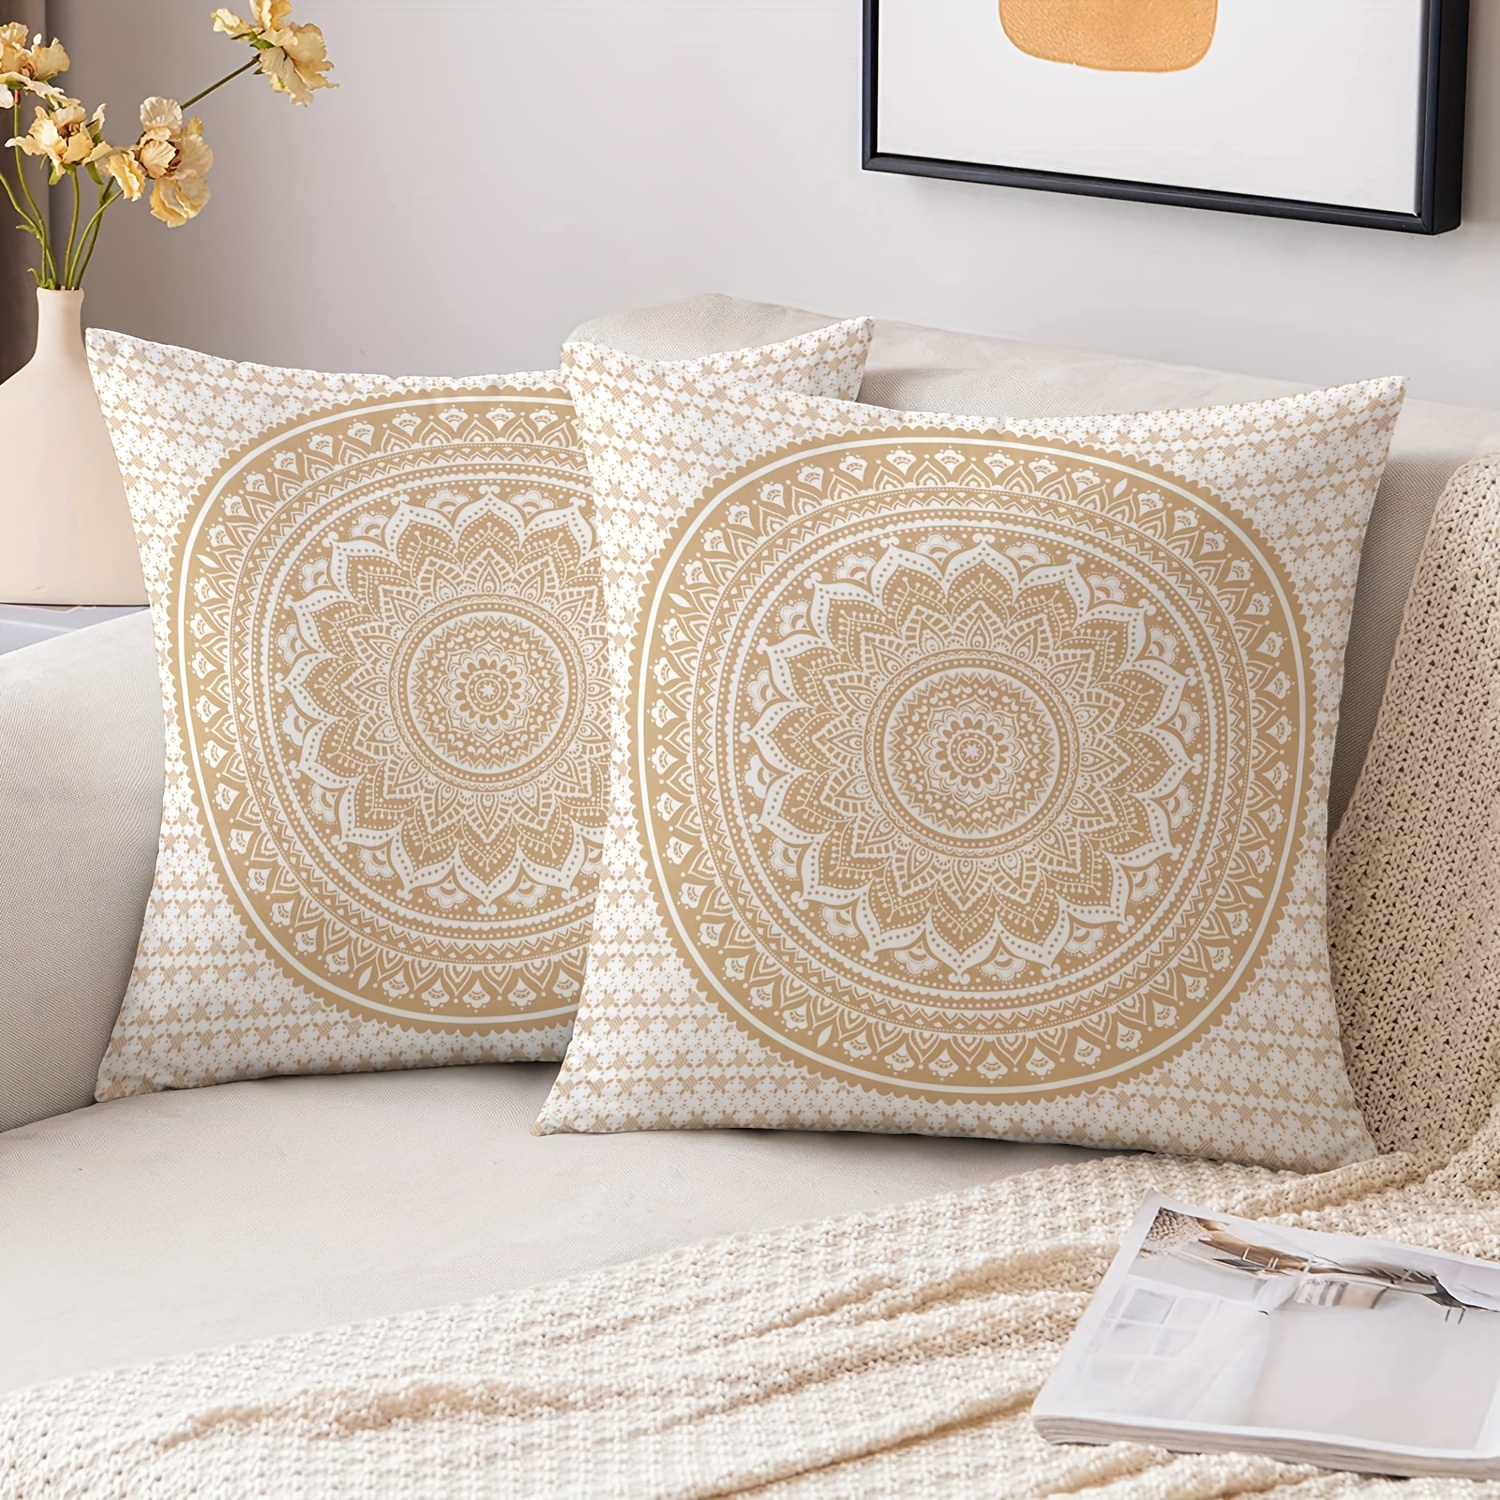 

2pcs Art Mandala Throw Pillow Cover Mysterious Wizardry Bohemian Dormitory Bedroom Home Decoration Short Fleece Fabric Double Sided Printing Without Pillow Insert